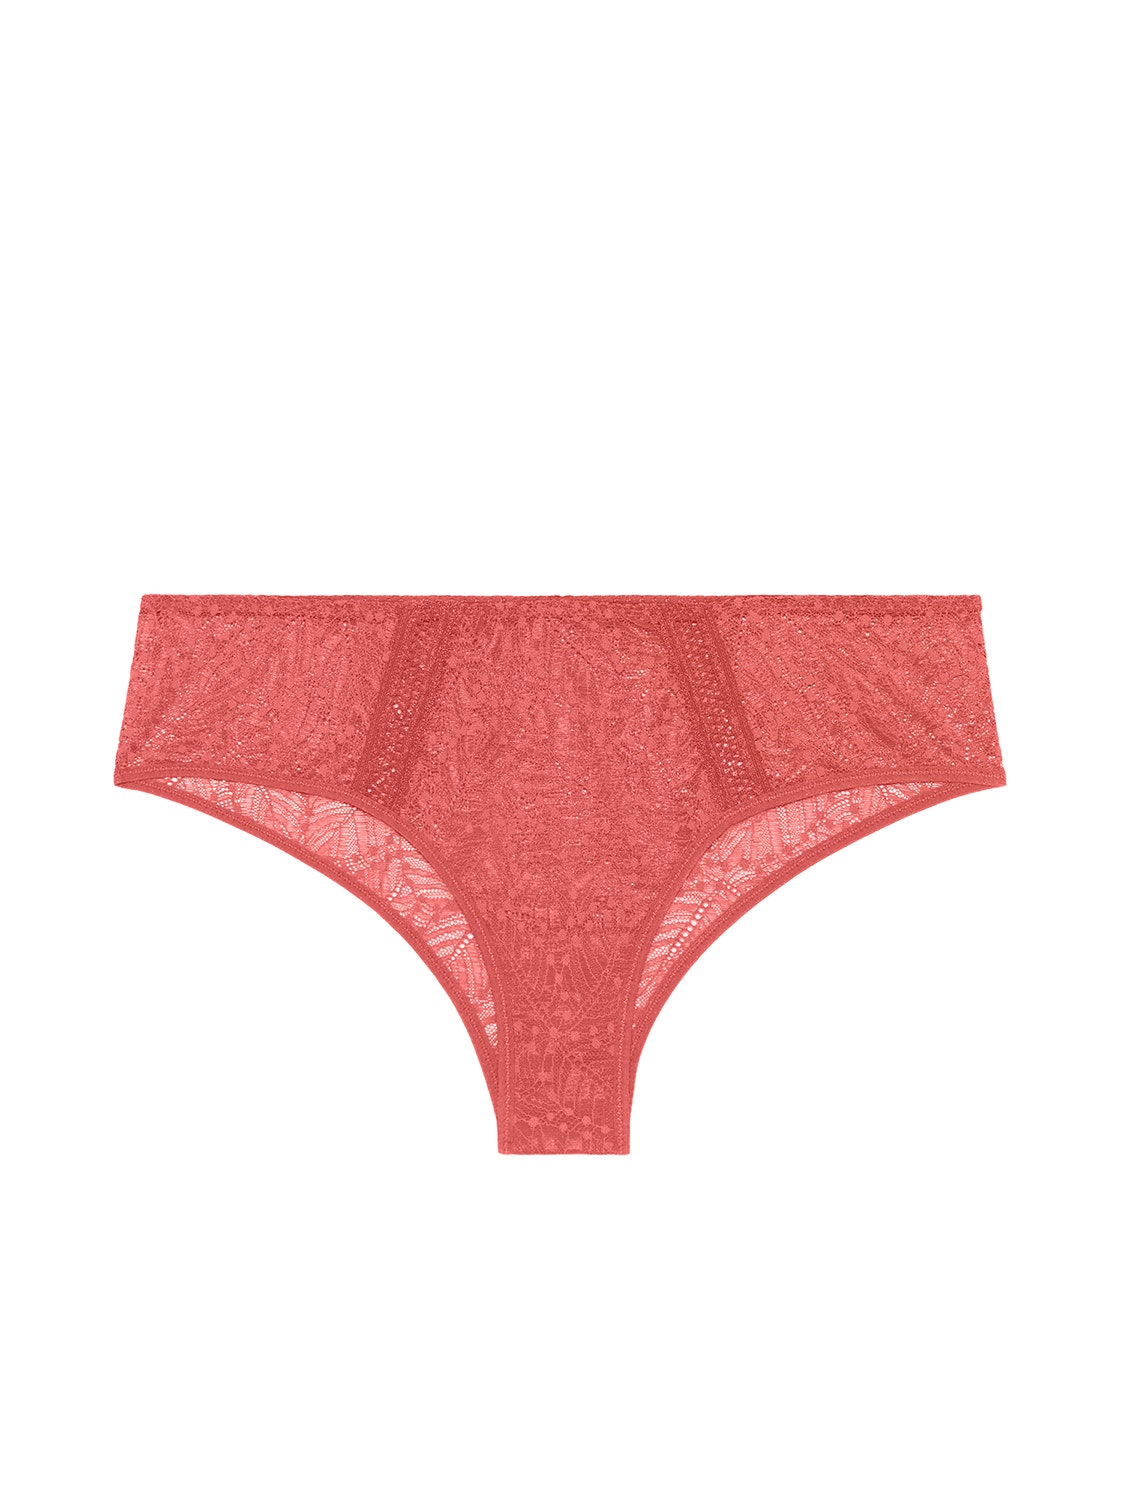 shorty-texas-pink-comete-40